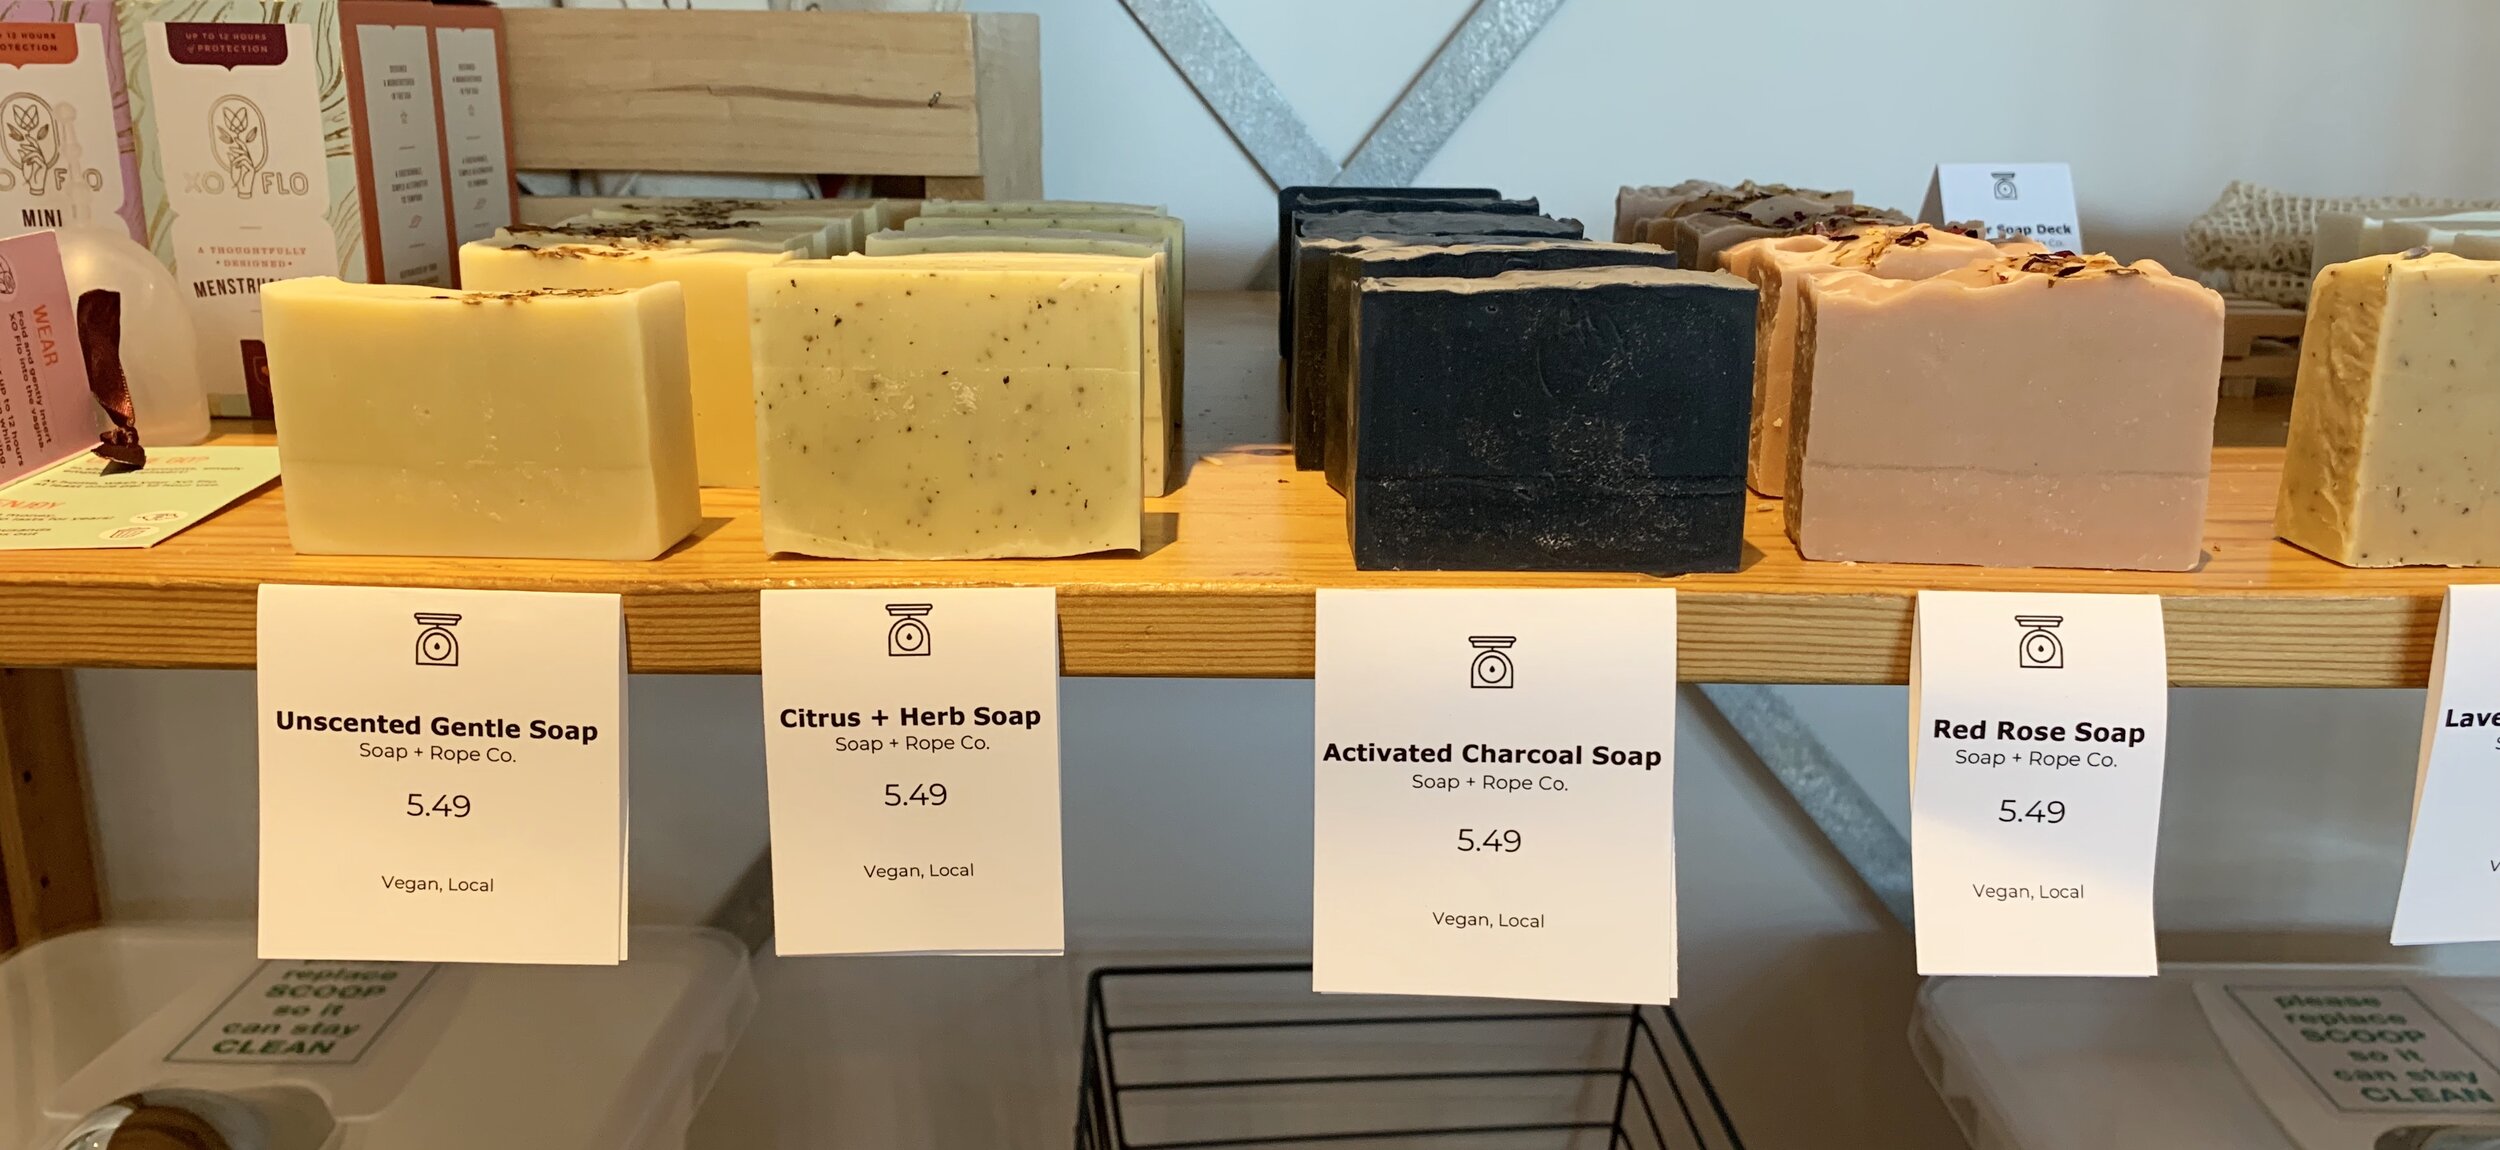 Several kinds of soap from Soap and Rope Co: unscented, citrus and herb, activated charcoal, and red rose.